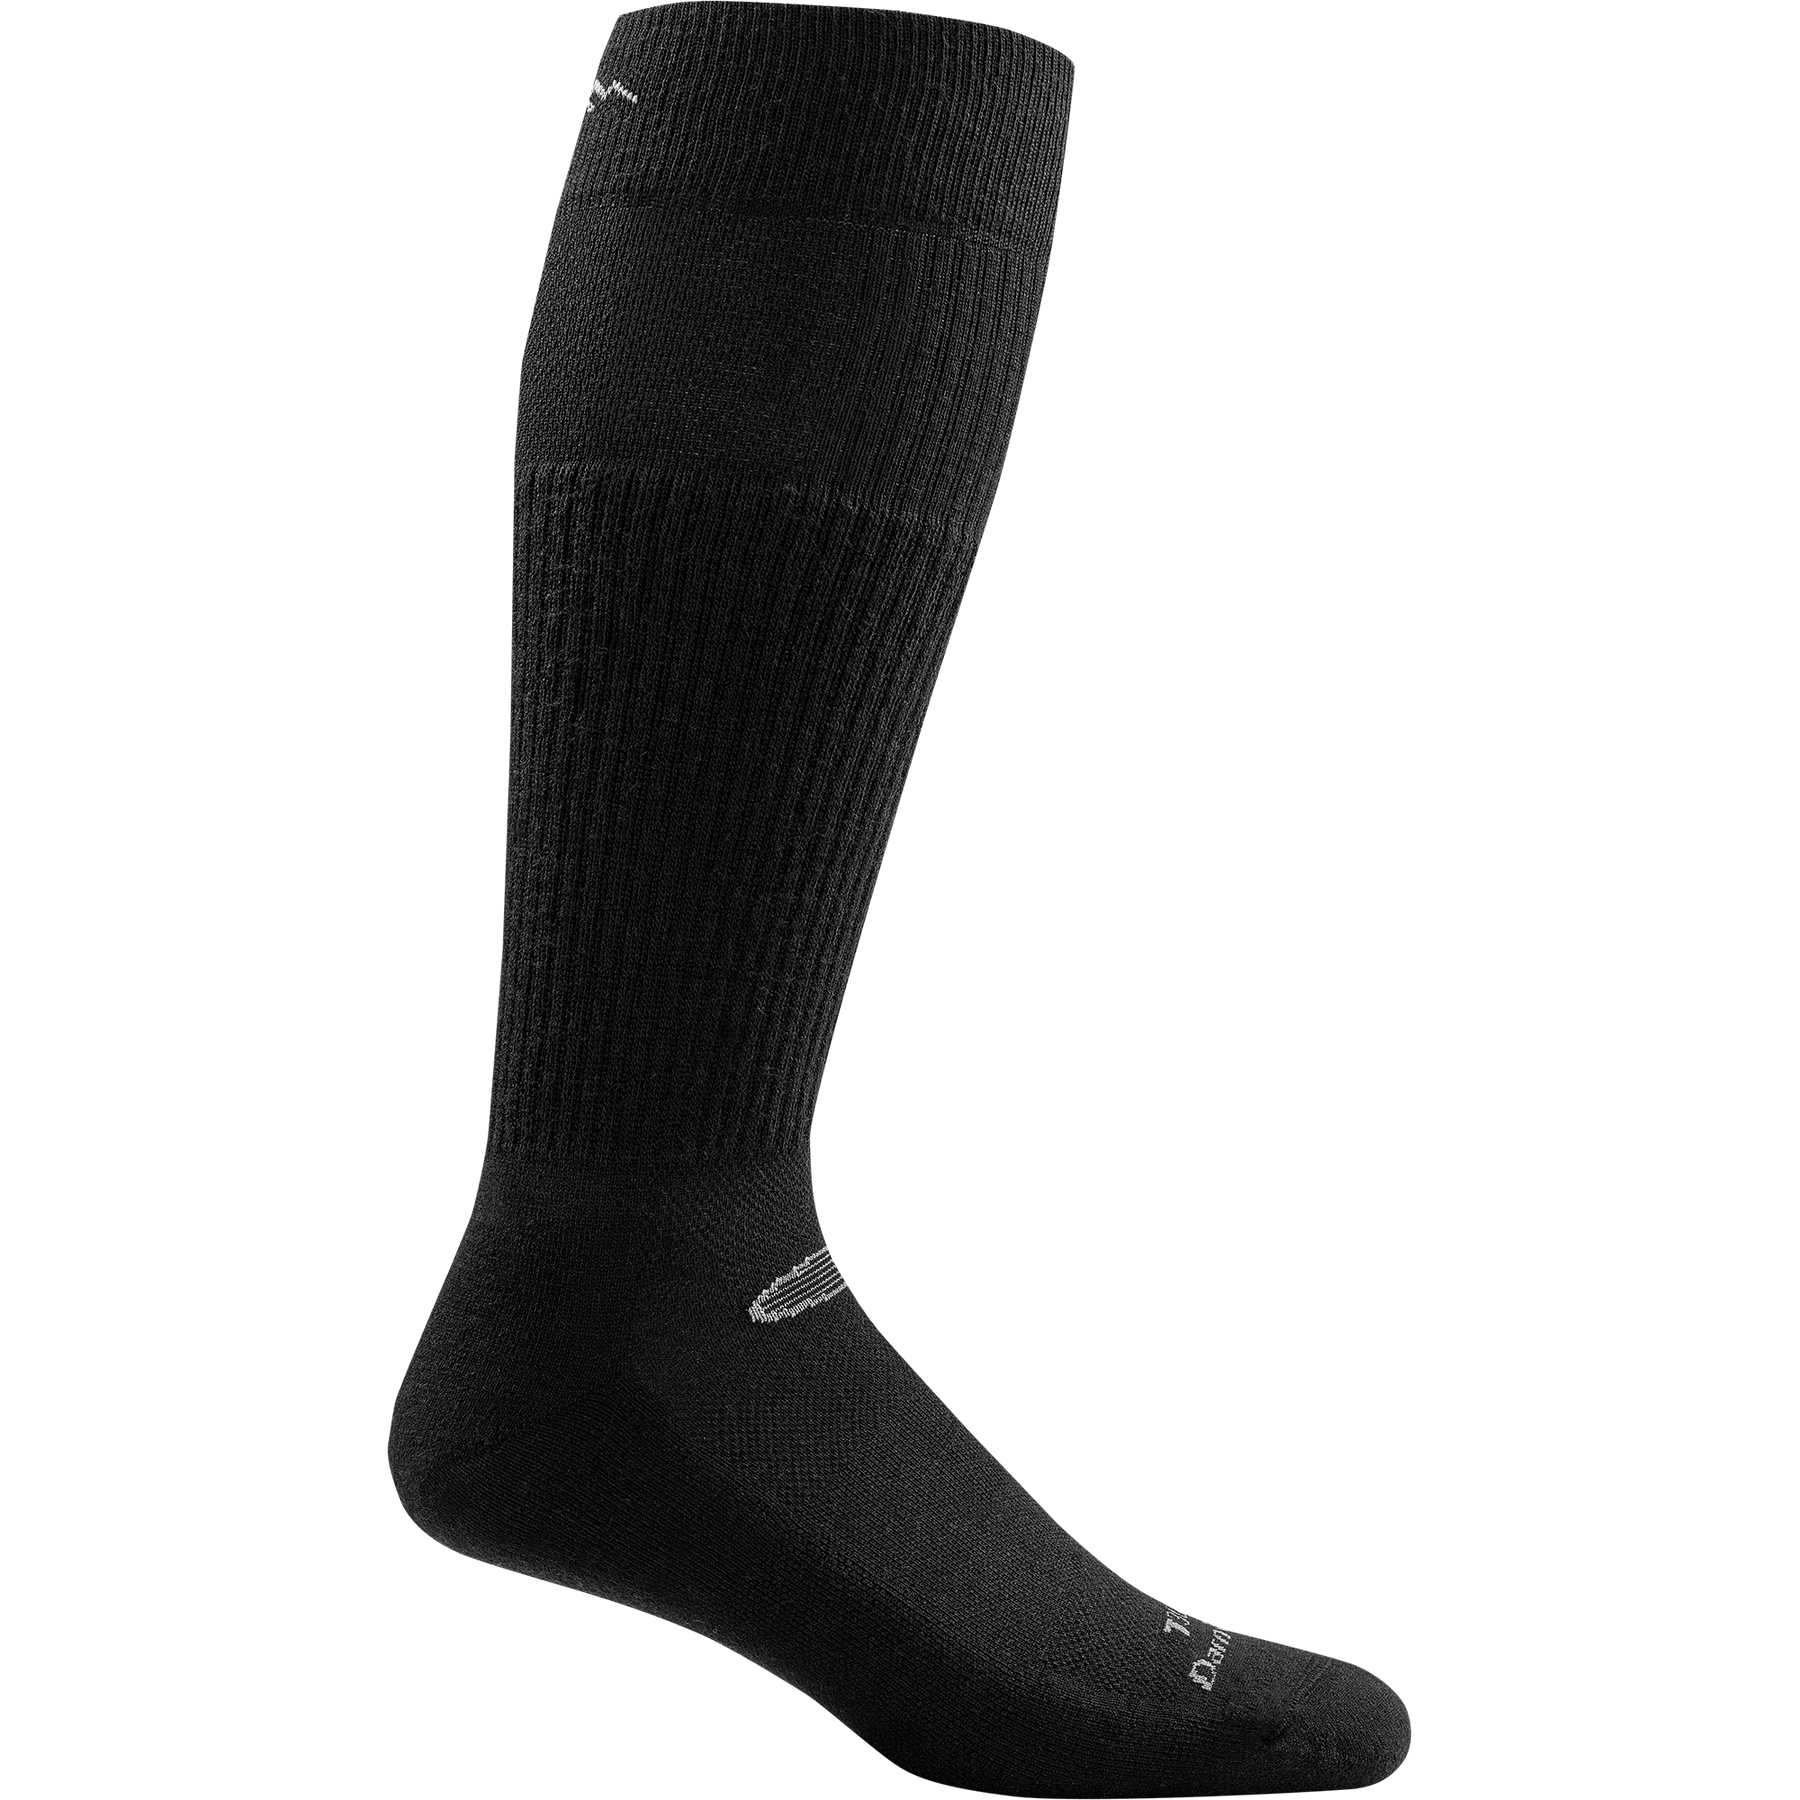 Tactical Mid-calf Lightweight Sock with Cushion - Men's